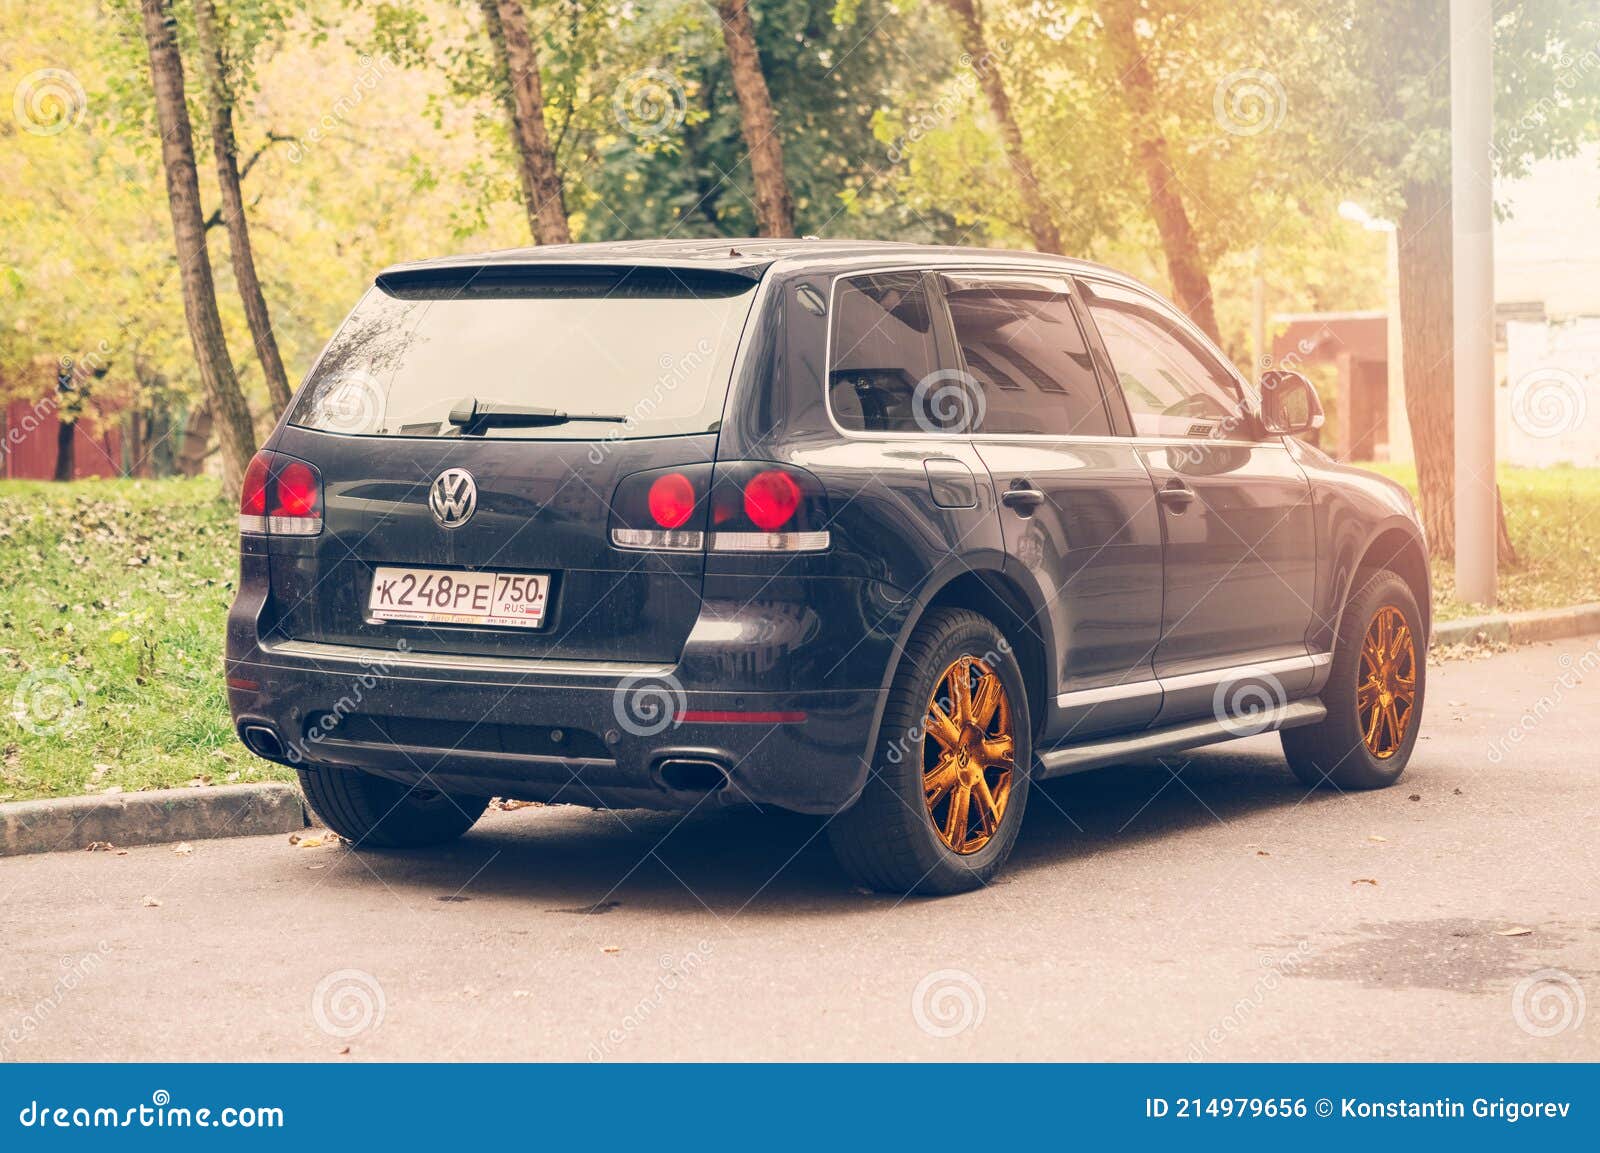 VW Touareg 7L in Stunning Dark Blue Body Color with Golden Wheels. Rear  View of Old Volkswagen Touareg Parked on Asphalt Road in Editorial Photo -  Image of trees, urban: 214979656